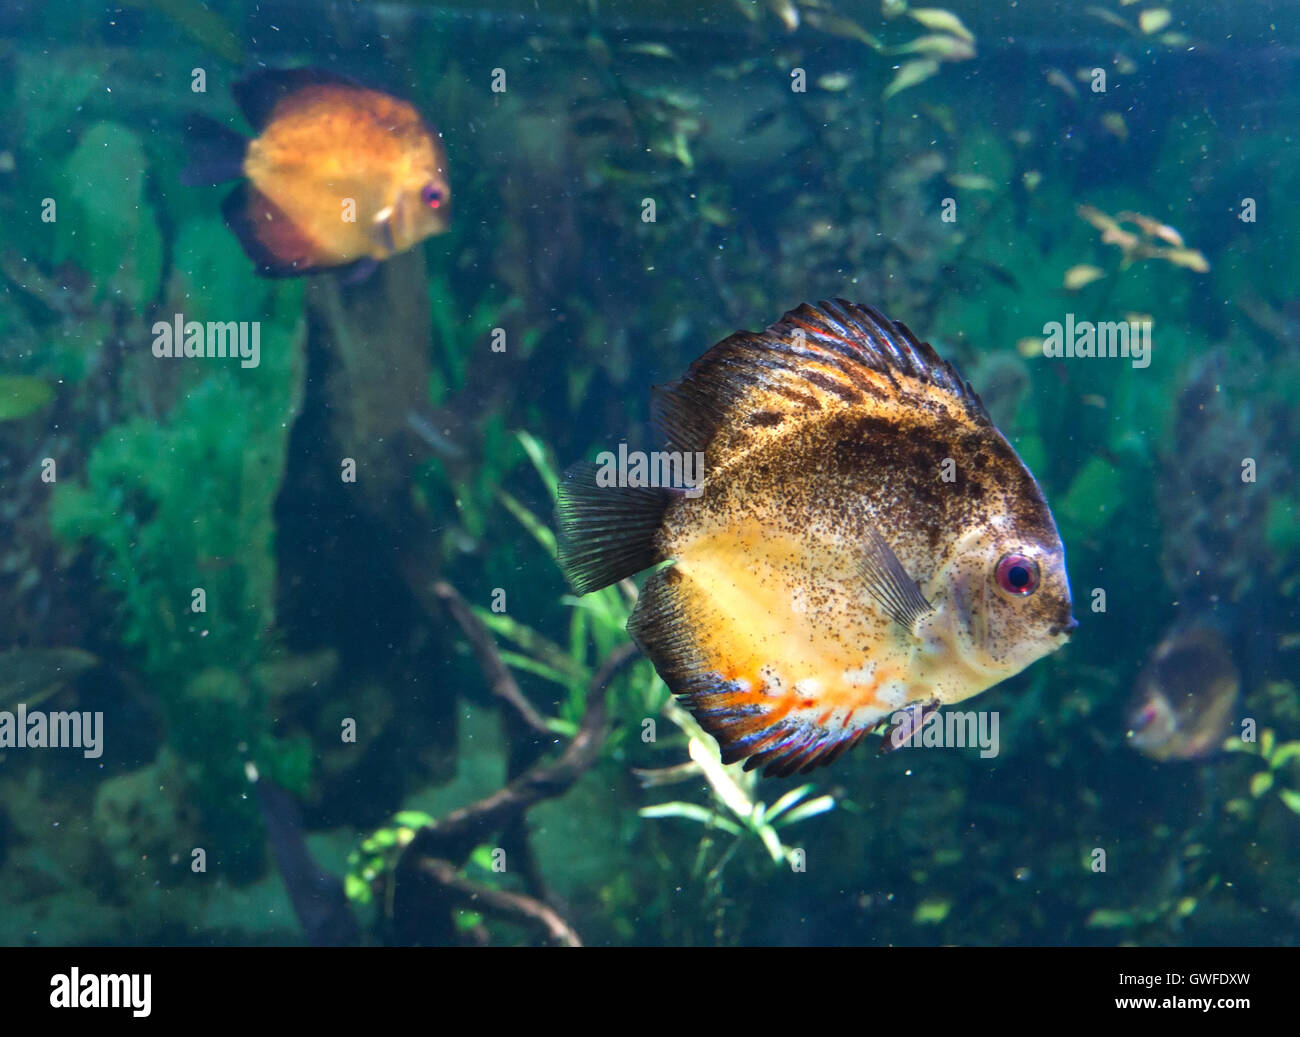 Morph of exotic tropical fish swimming in aquarium. Can be used as a wallpaper or postcard. Stock Photo